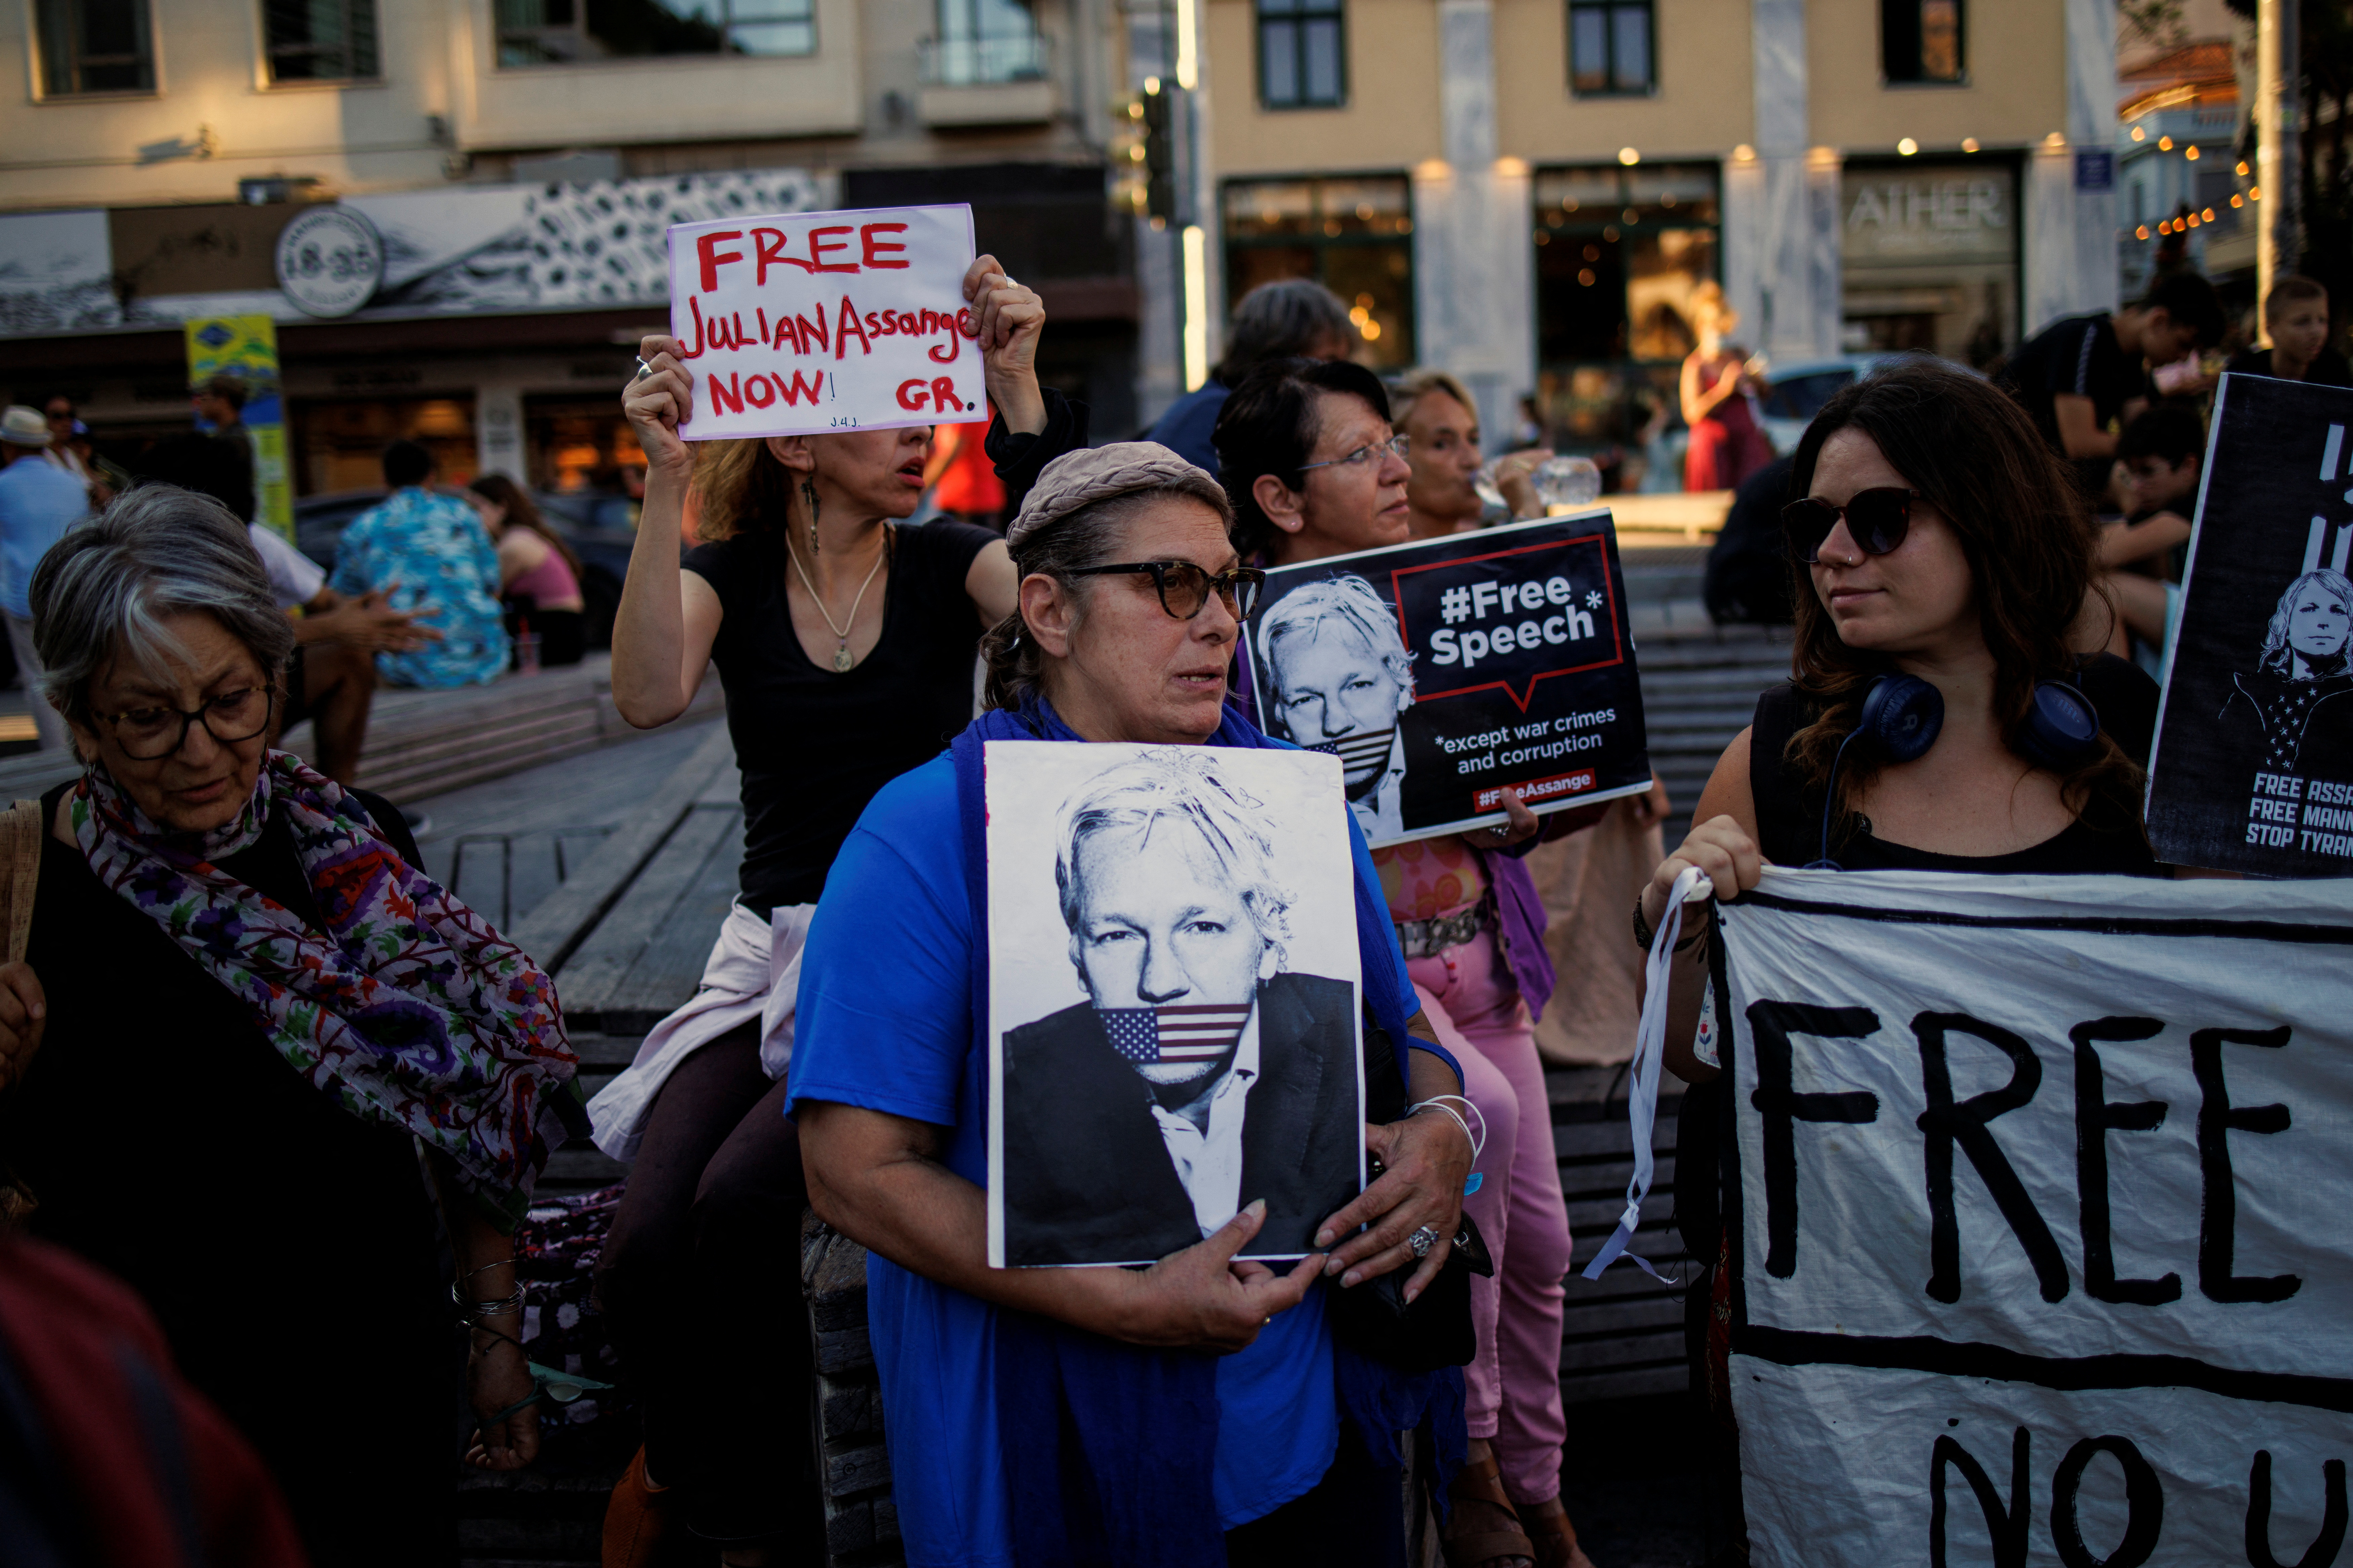 Supporters take part in a protest against the extradition of WikiLeaks' founder Julian Assange from Britain to the U.S., in Athens, Greece, June 20, 2022. REUTERS/Alkis Konstantinidis